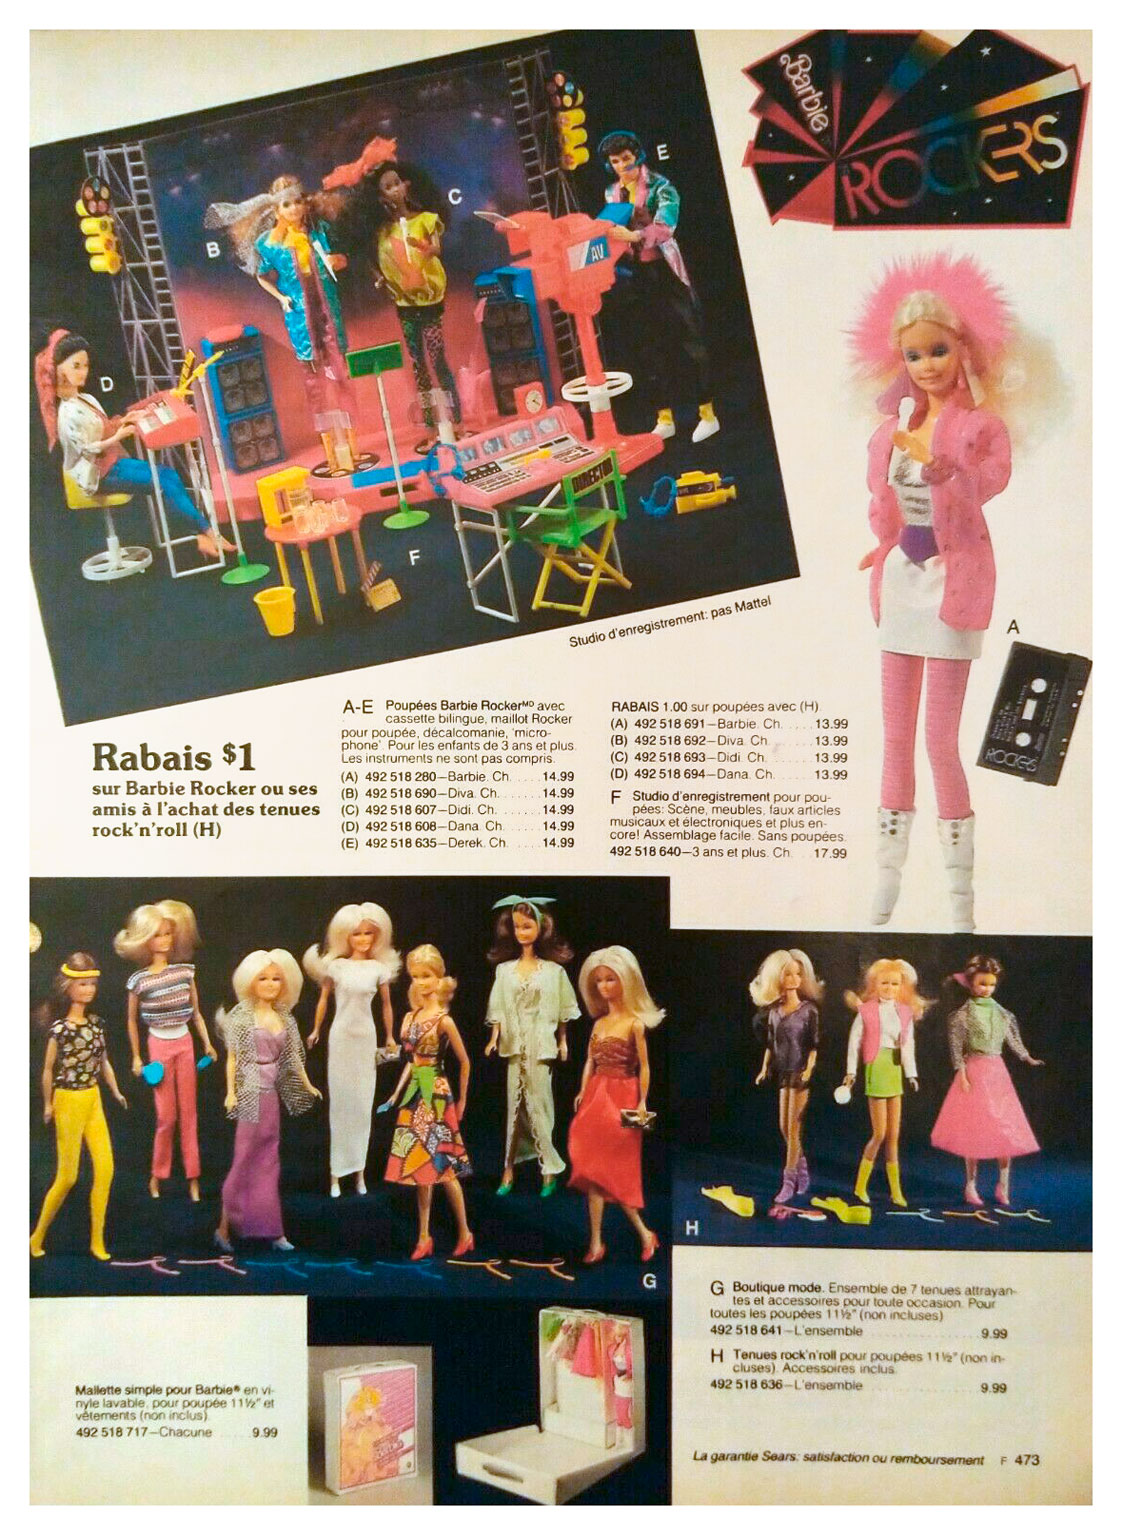 From 1986 (French) Canadian Sears Christmas catalogue